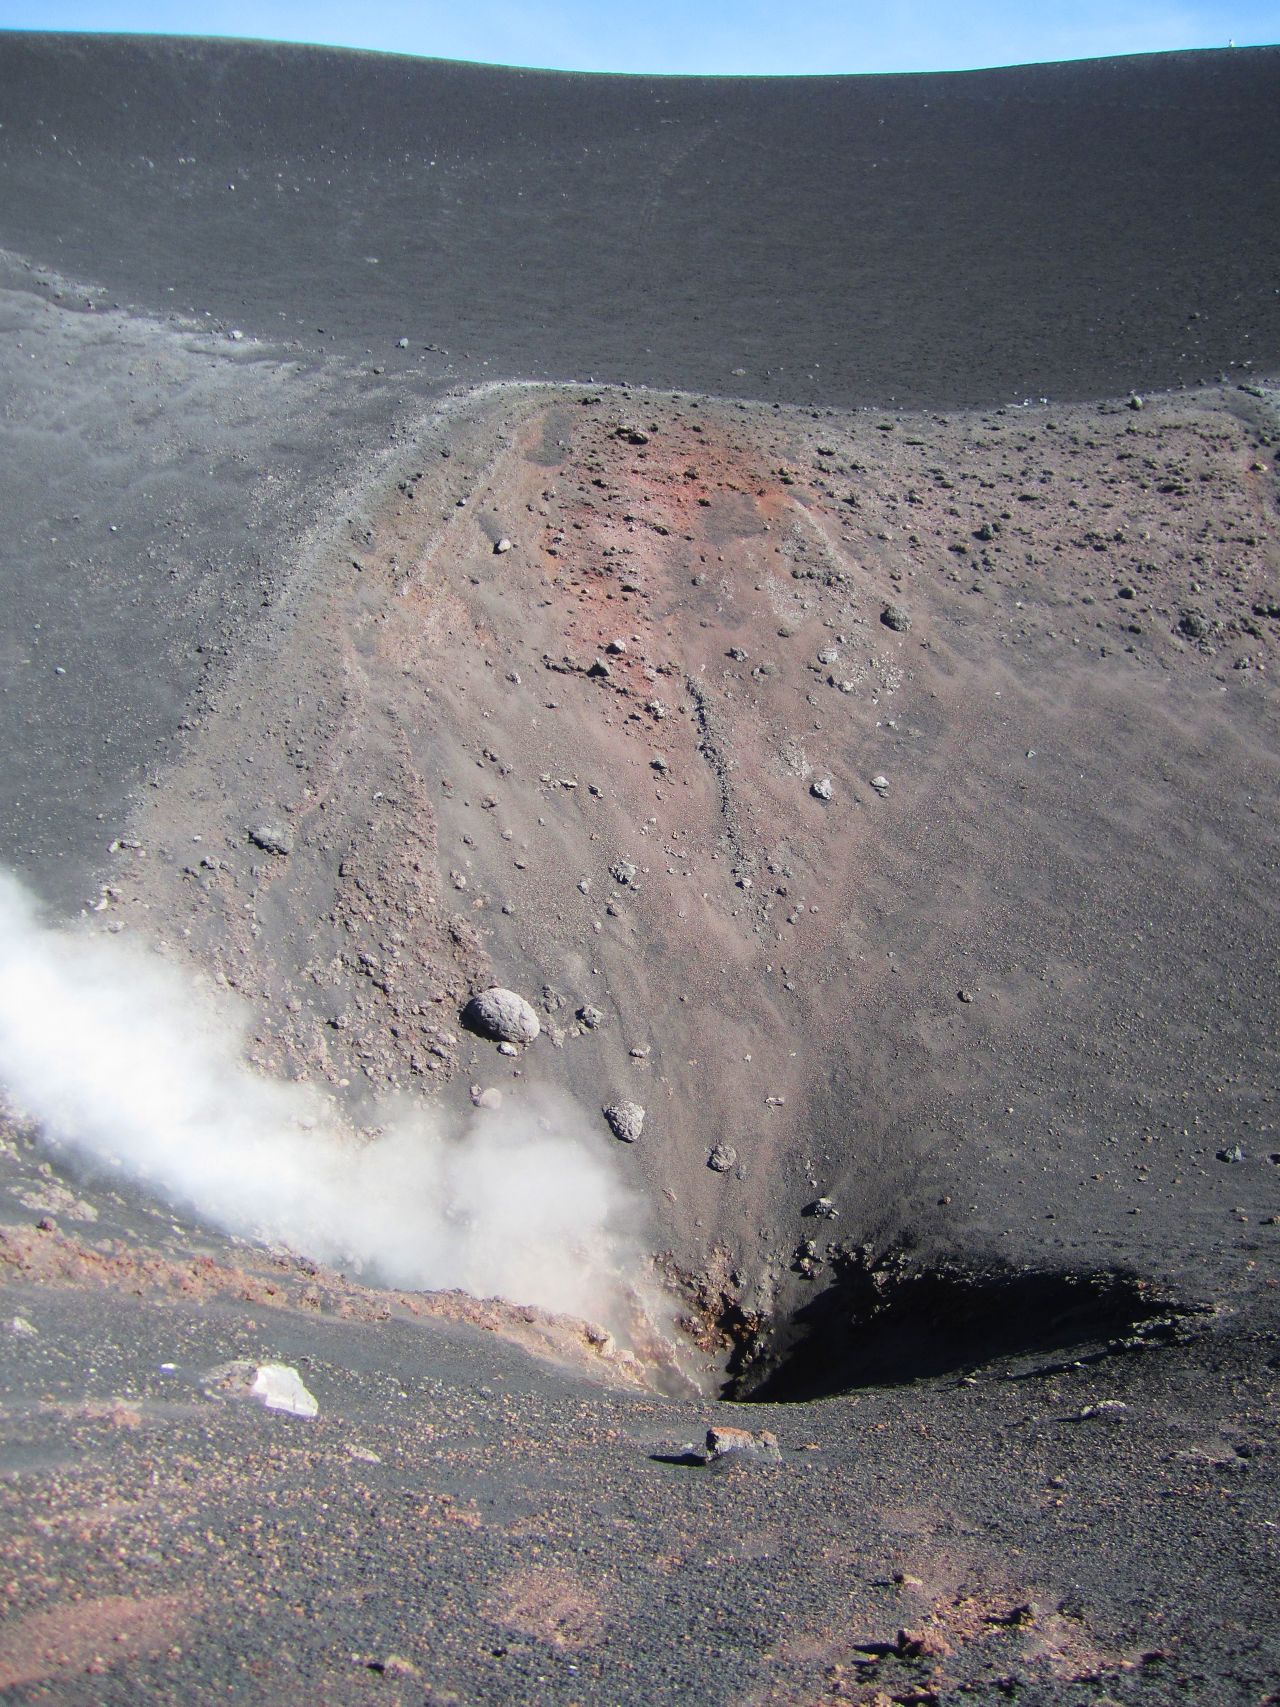 Although steam flows from vents and craters, the main visitor area doesn't have the unpleasant sulfur smell often associated with volcanoes.